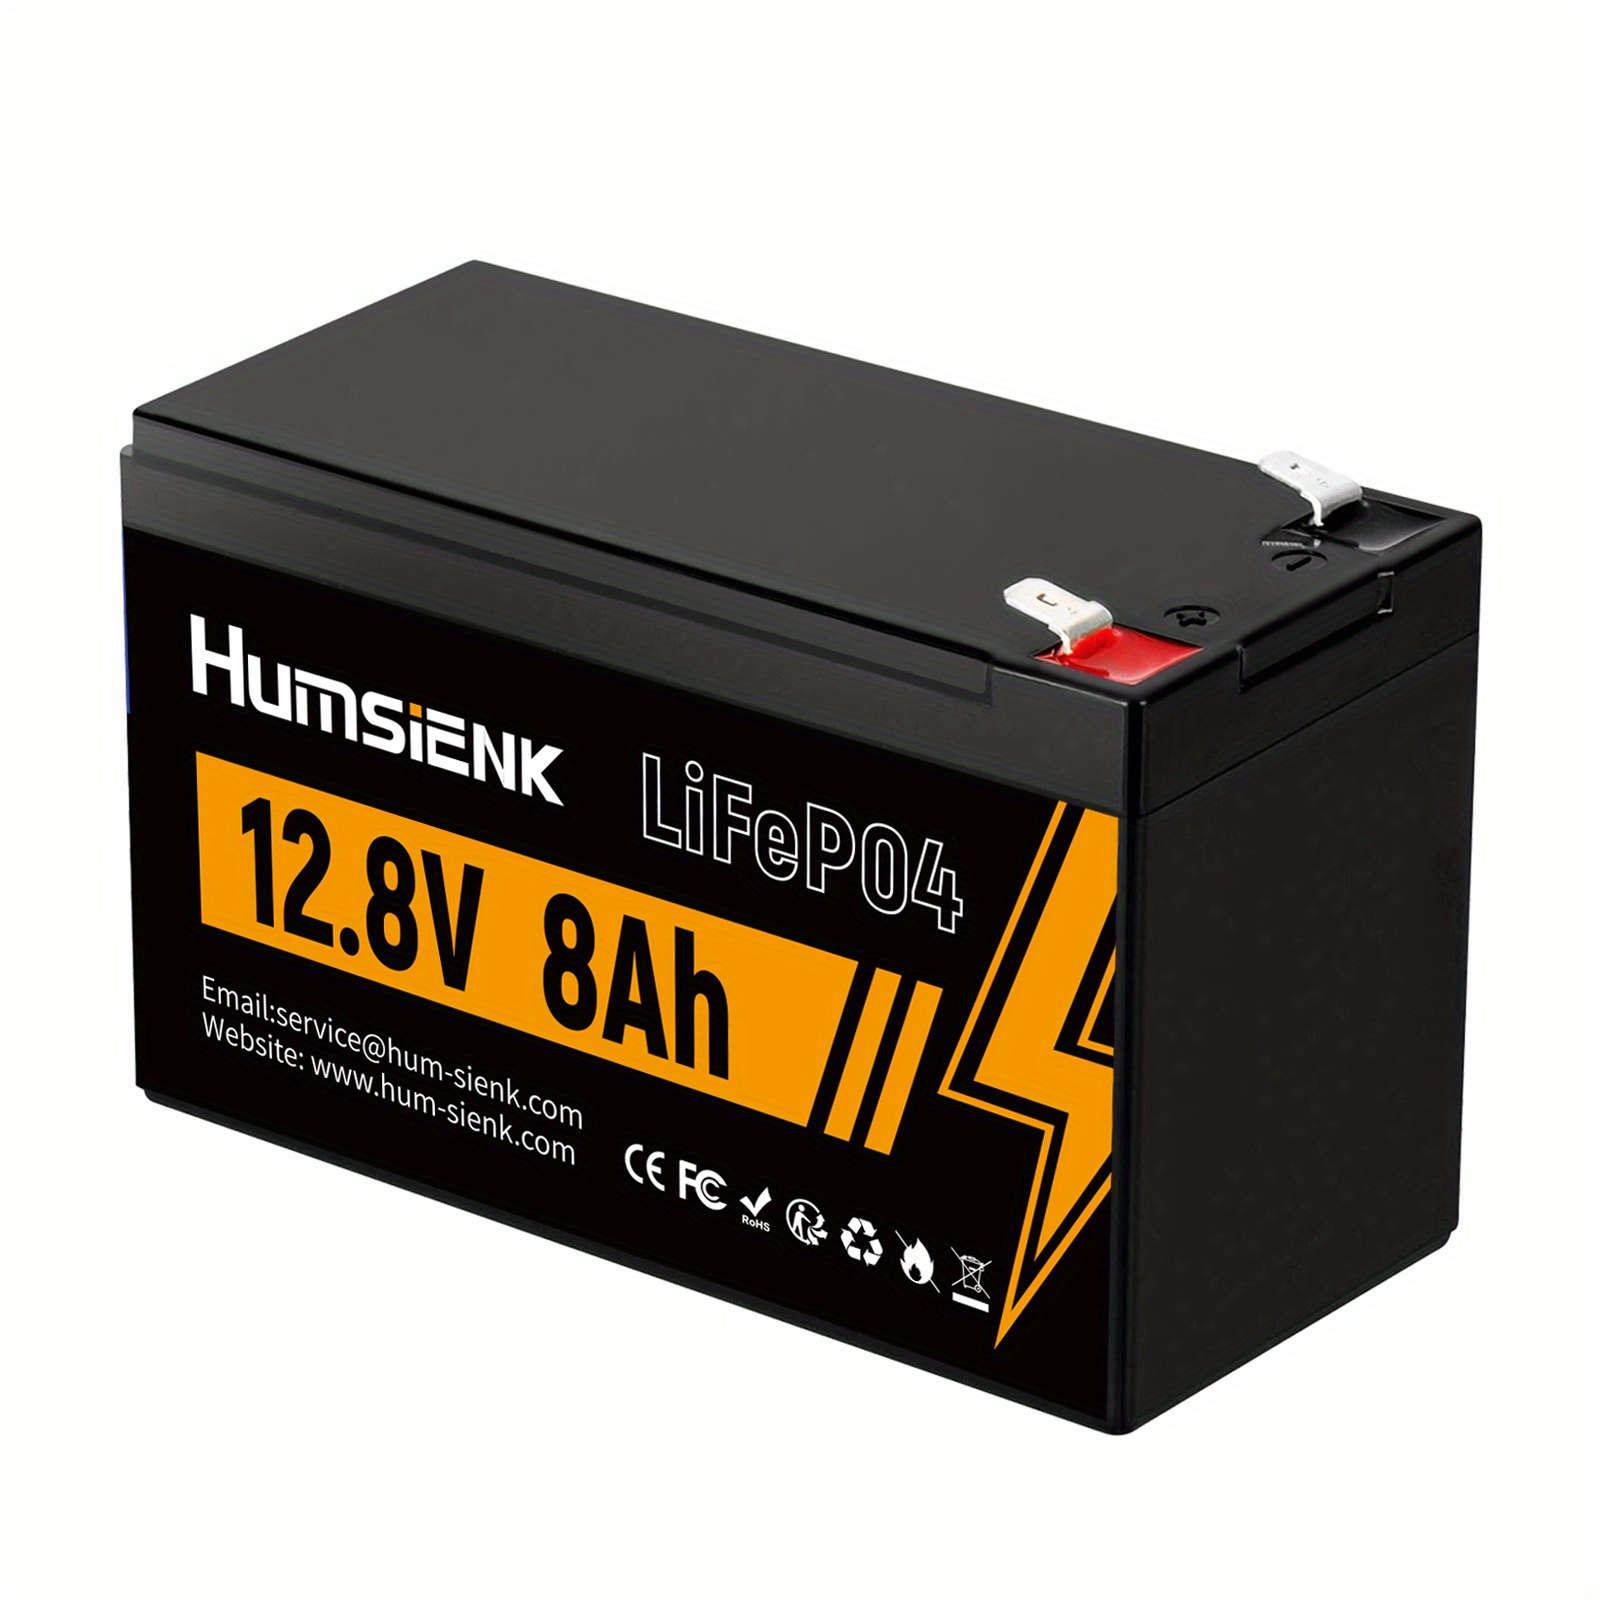 

12v 8ah Lifepo4 Battery - Cold Temperature Shield - Perfect For Camping, Residential Energy Storage, Illumination